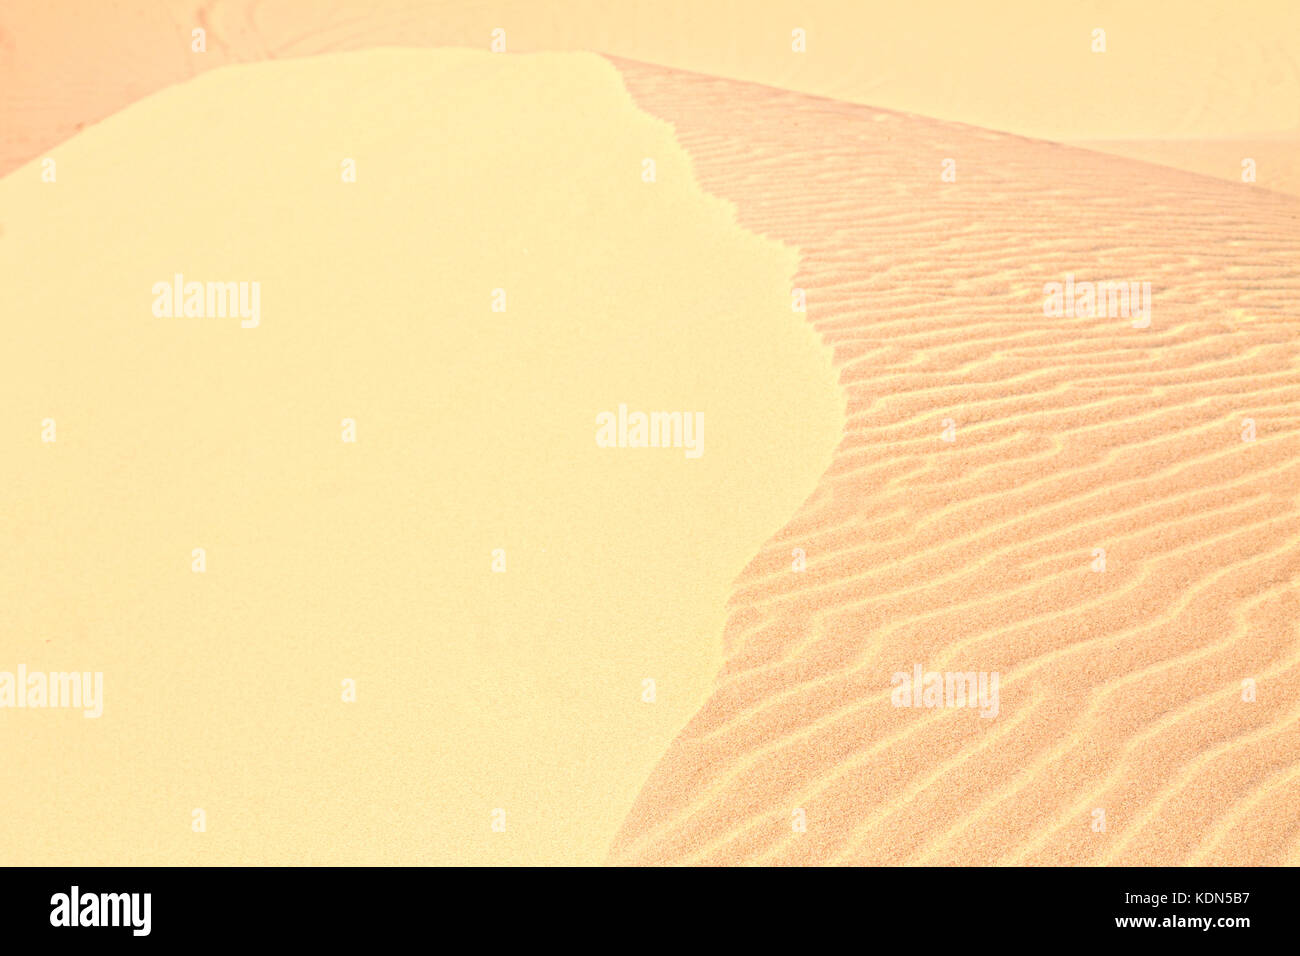 patterns in the sand dunes made by the wind movements Stock Photo